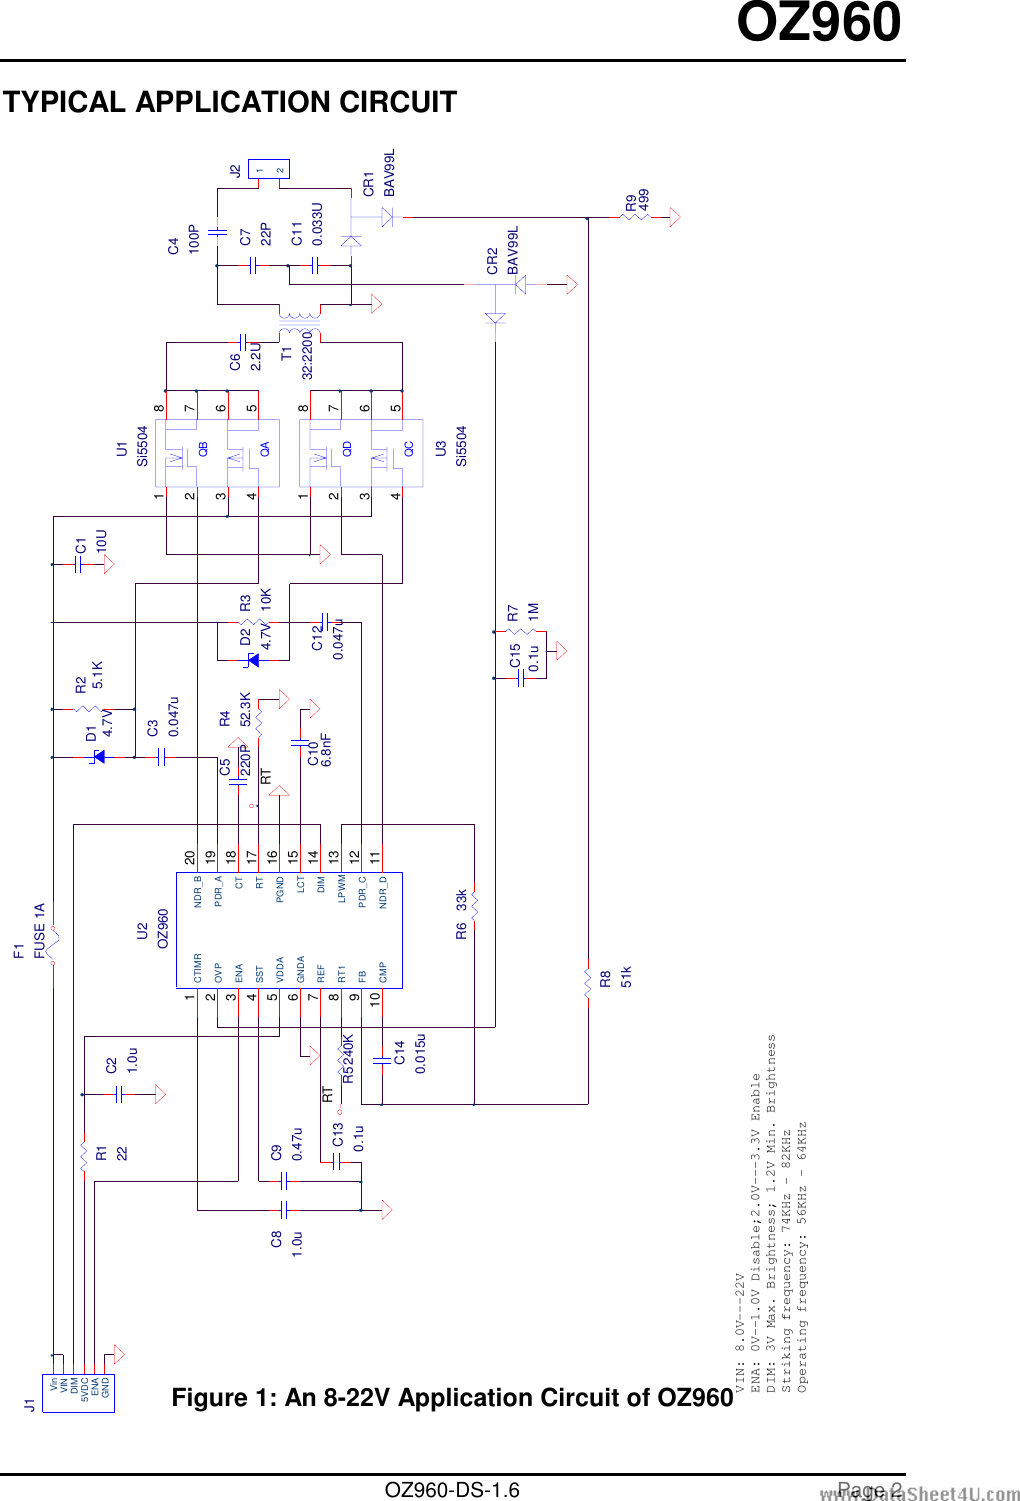 Page 2 of 12 - CCFL Backlight Controller 2008129131956425